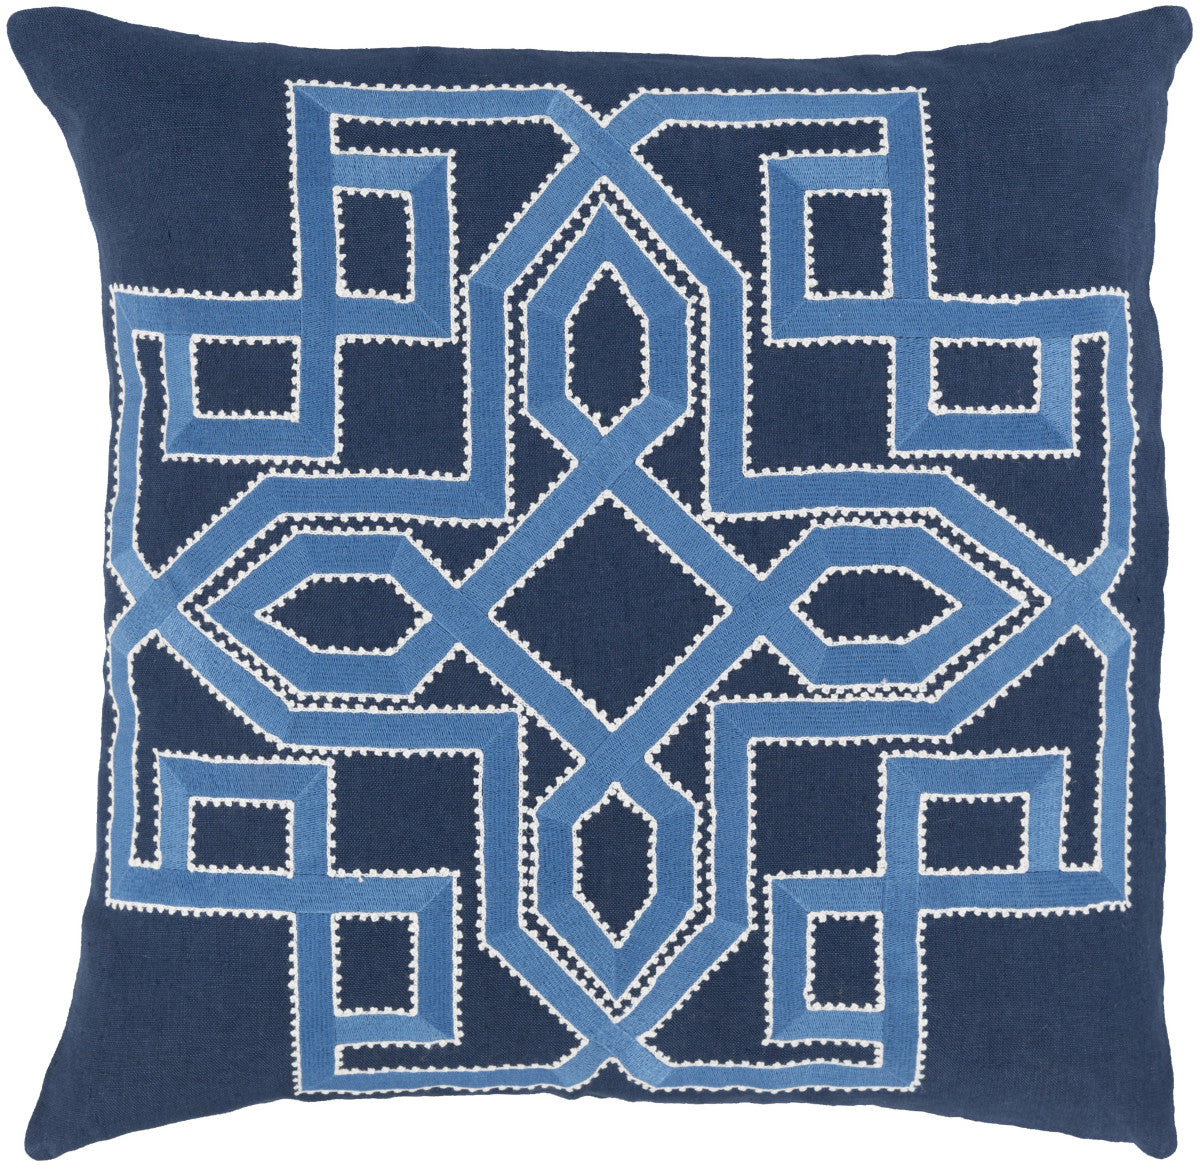 Surya Gatsby Multidimensional Chic GLD-002 Pillow by Beth Lacefield